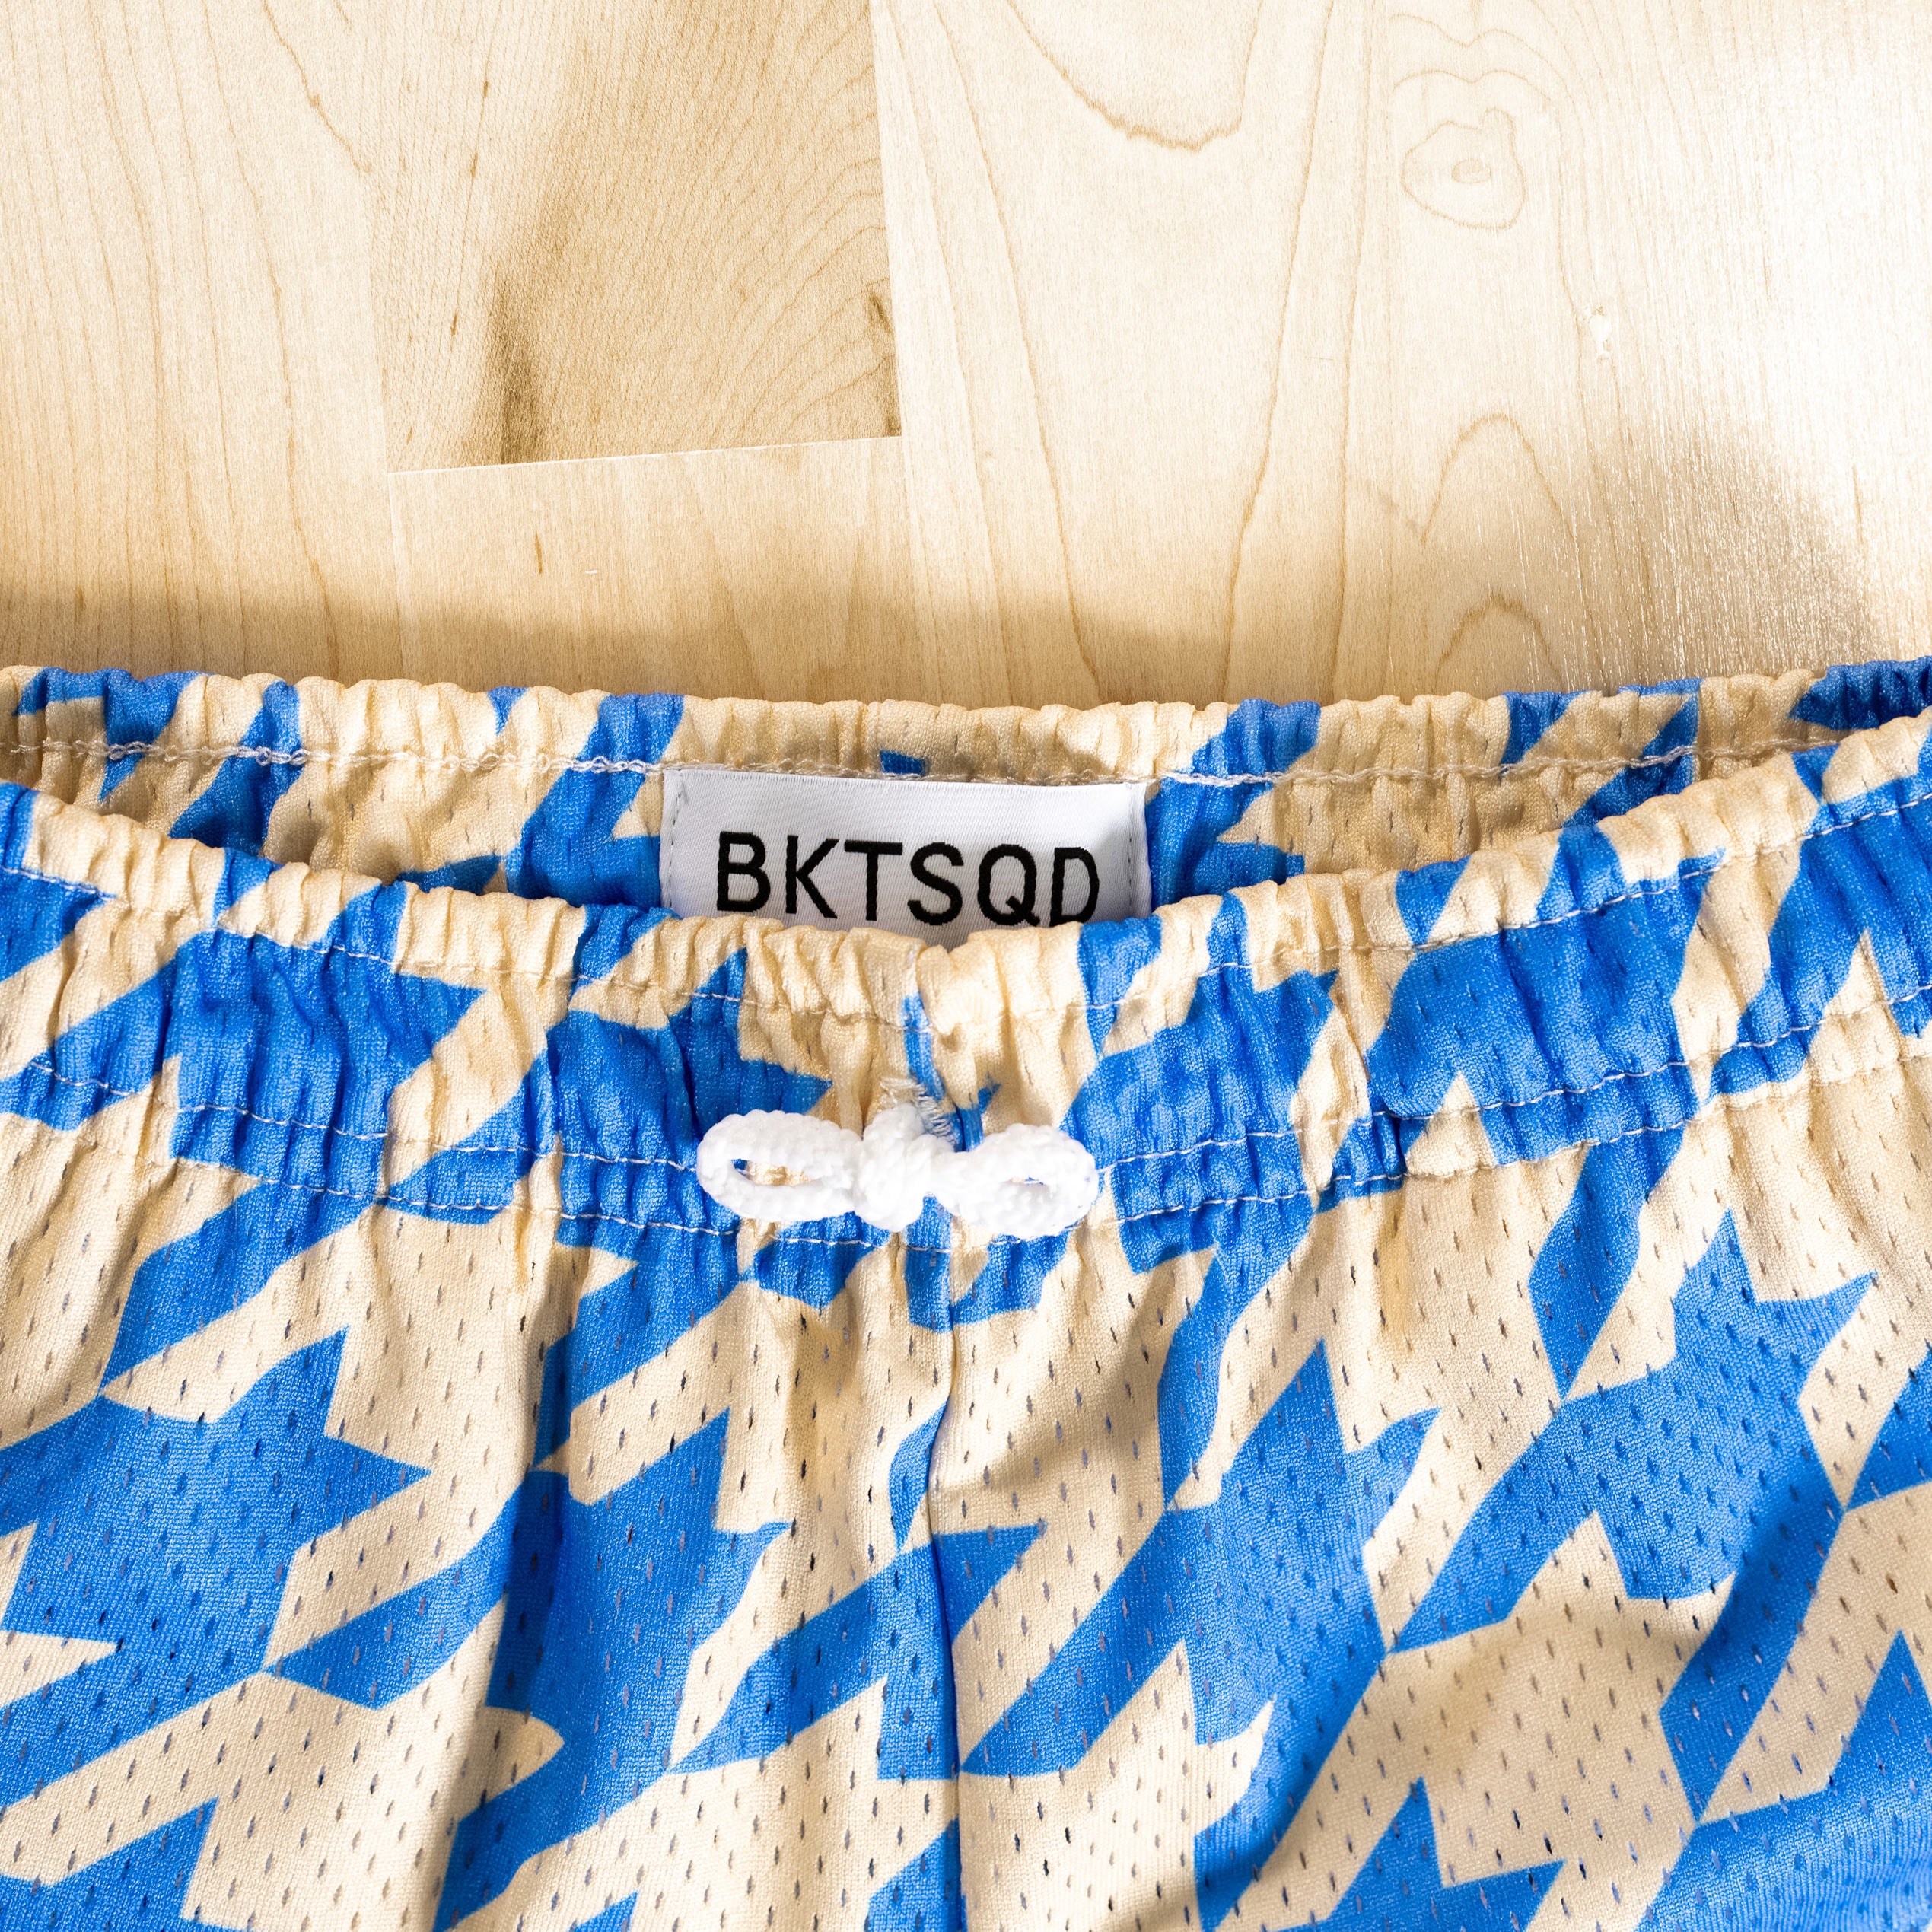 HOUNDSTOOTH YOUTH SHORTS - COTTON BLUE